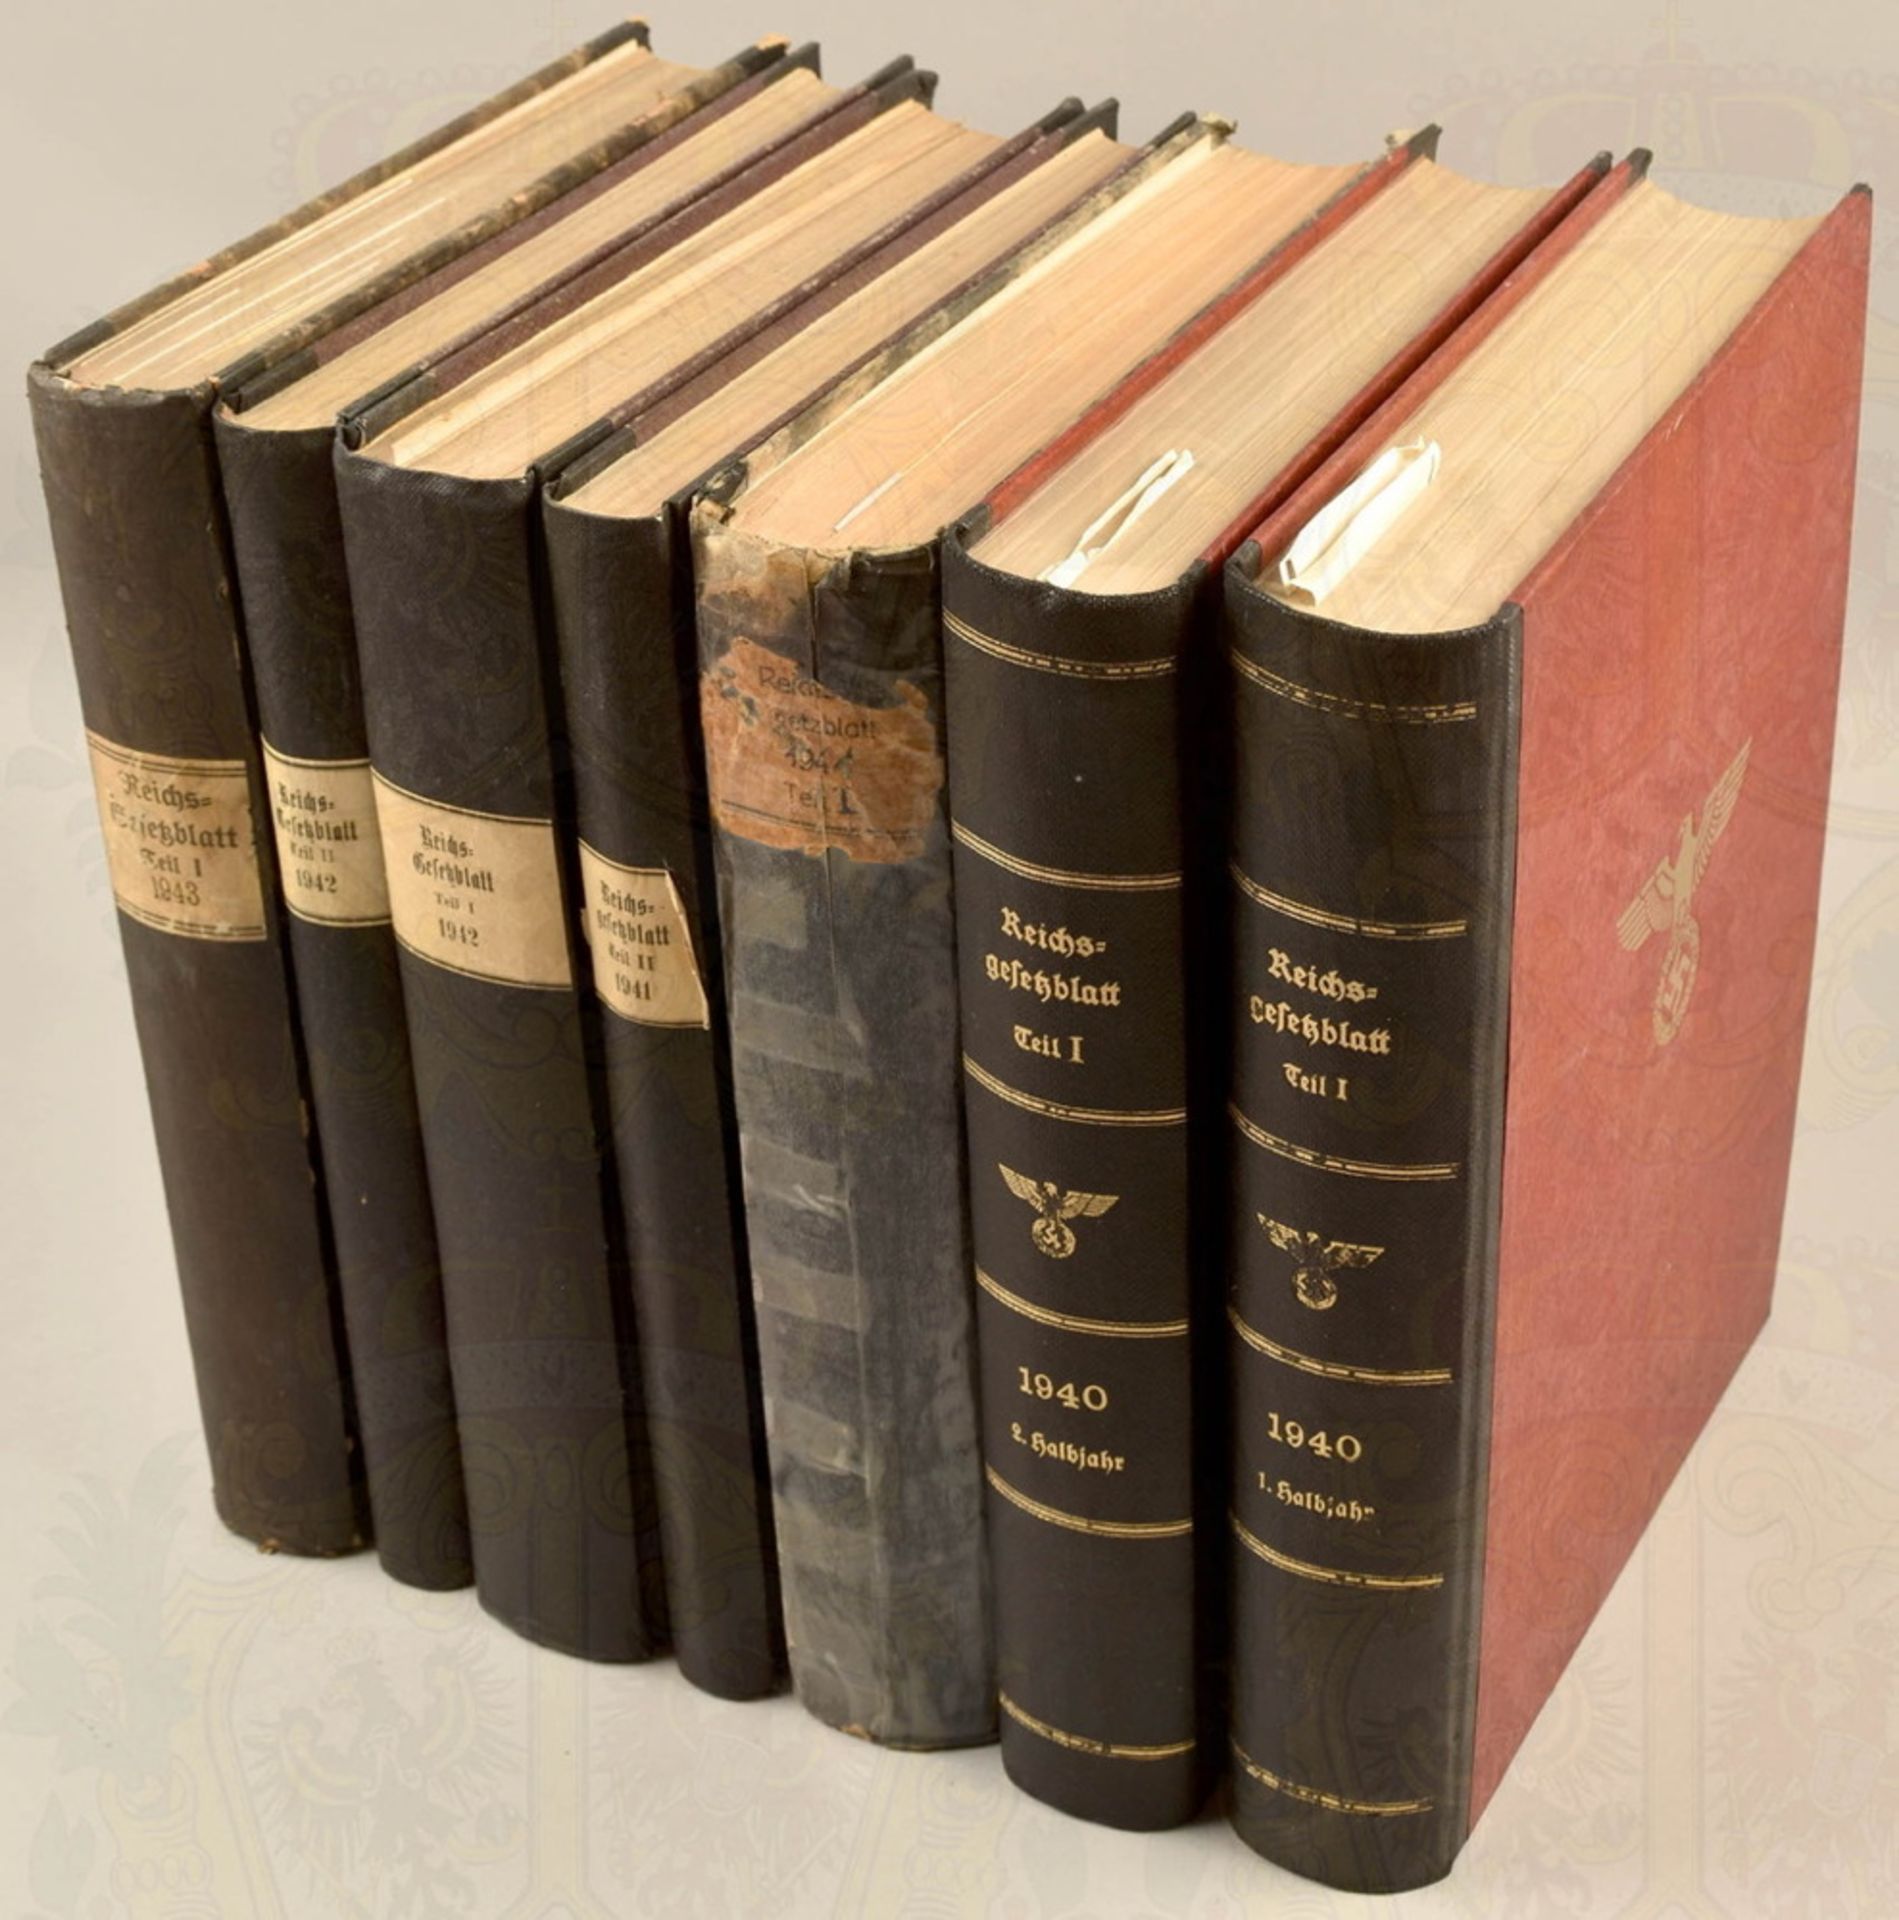 7 volumes legal texts of the Third Reich 1940-1943 - Image 2 of 4